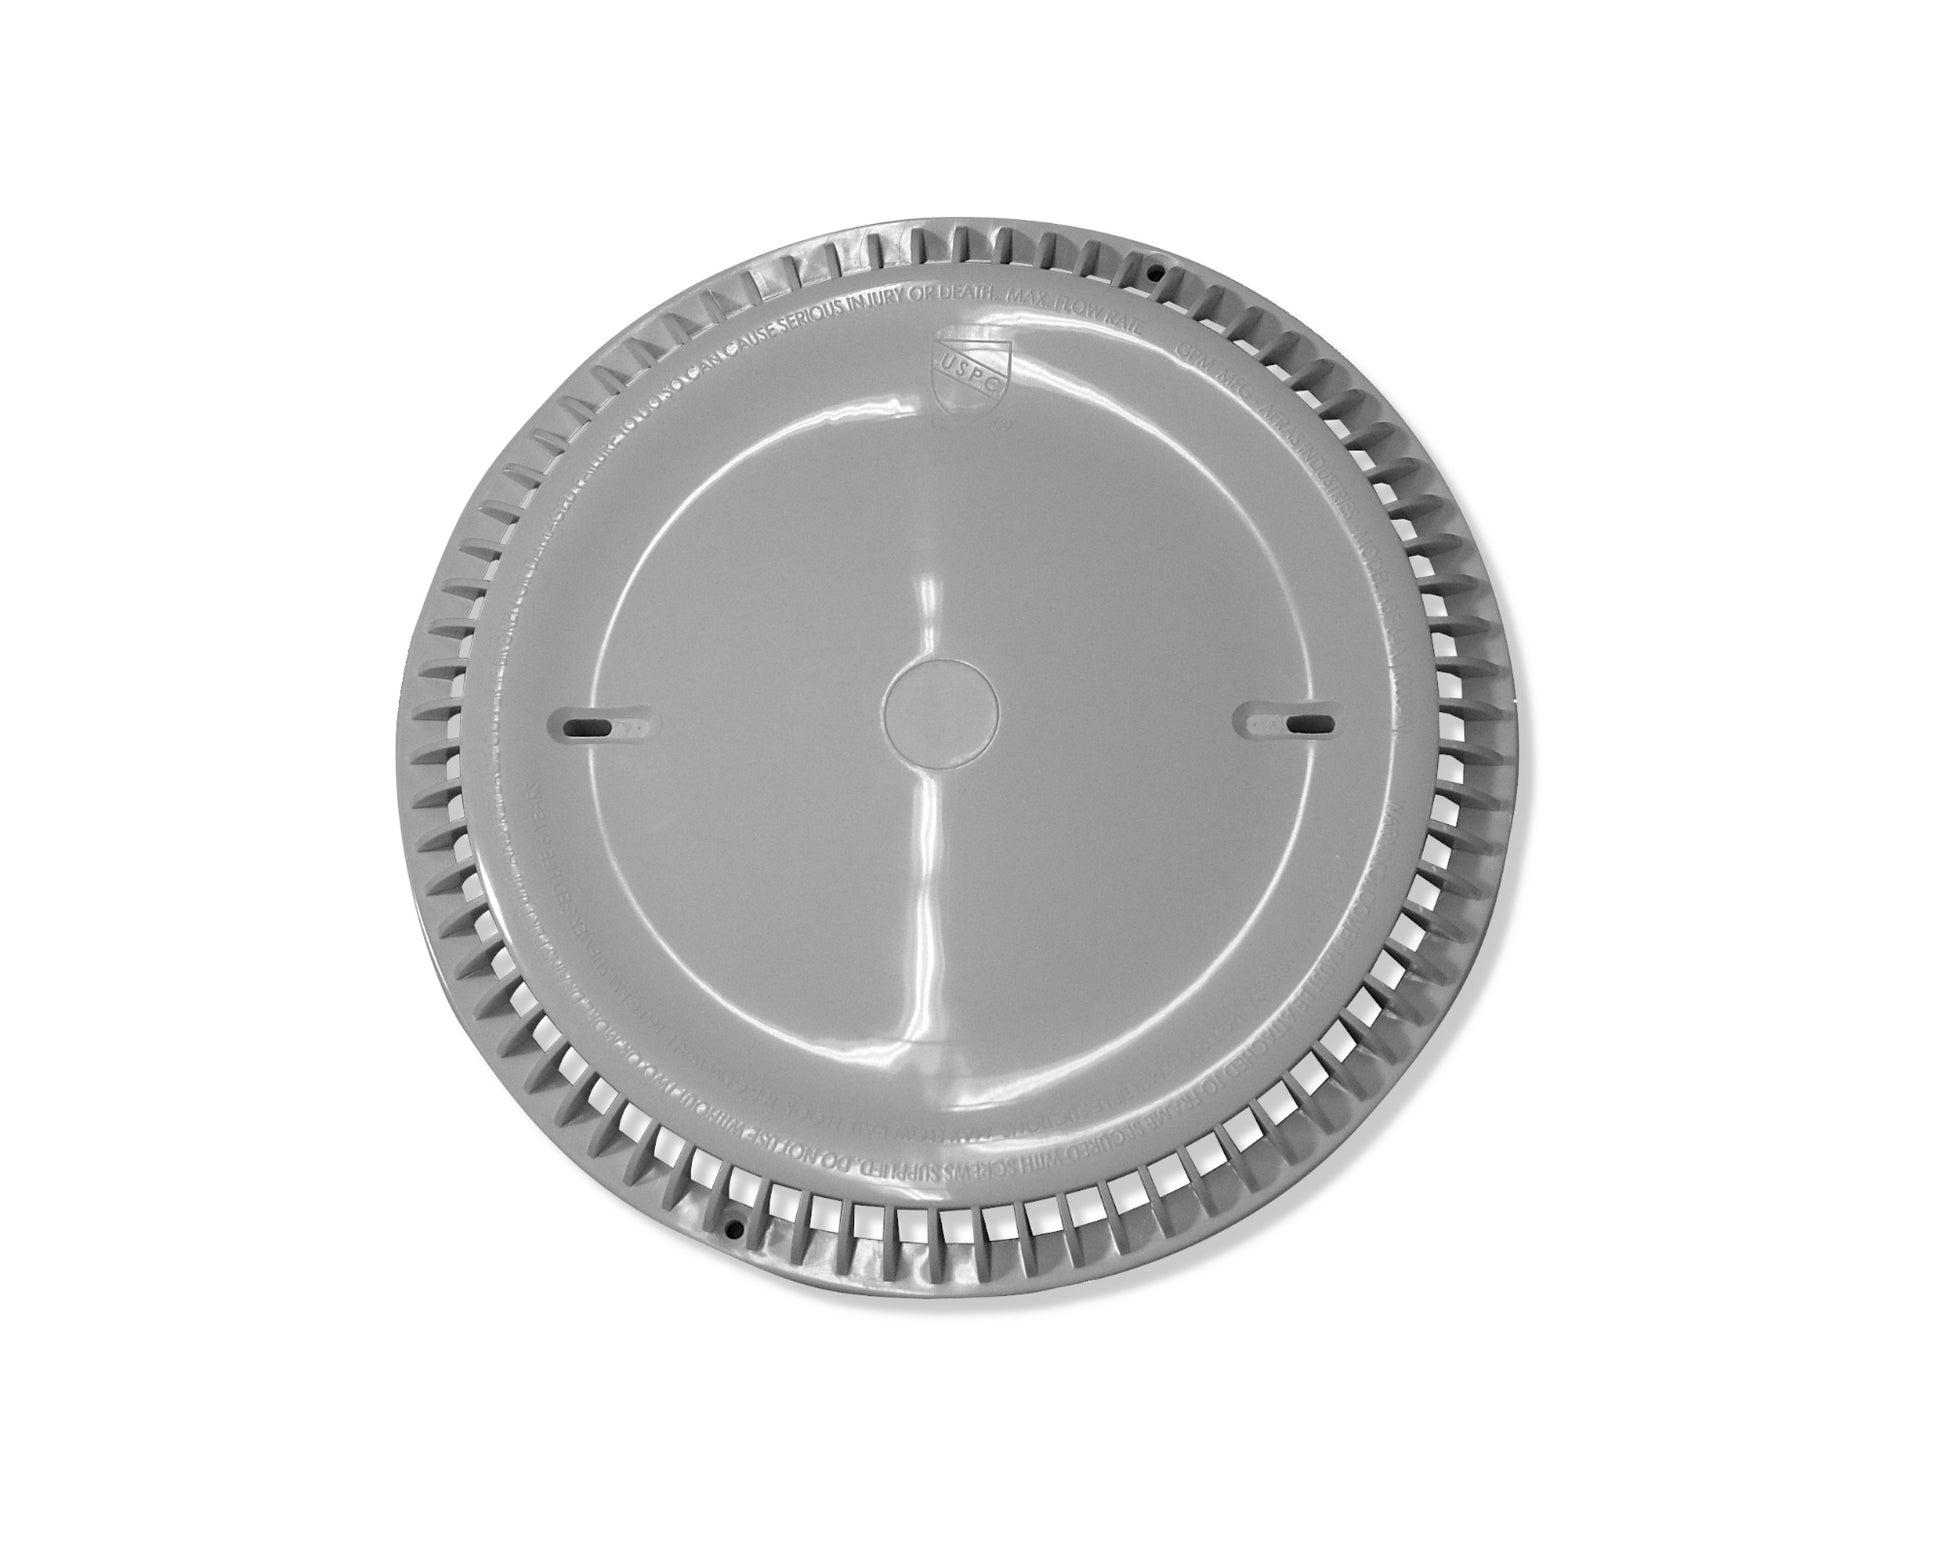 Afras Anti-Vortex ABS Drain Cover 11 inches Light Grey ABS for Pools